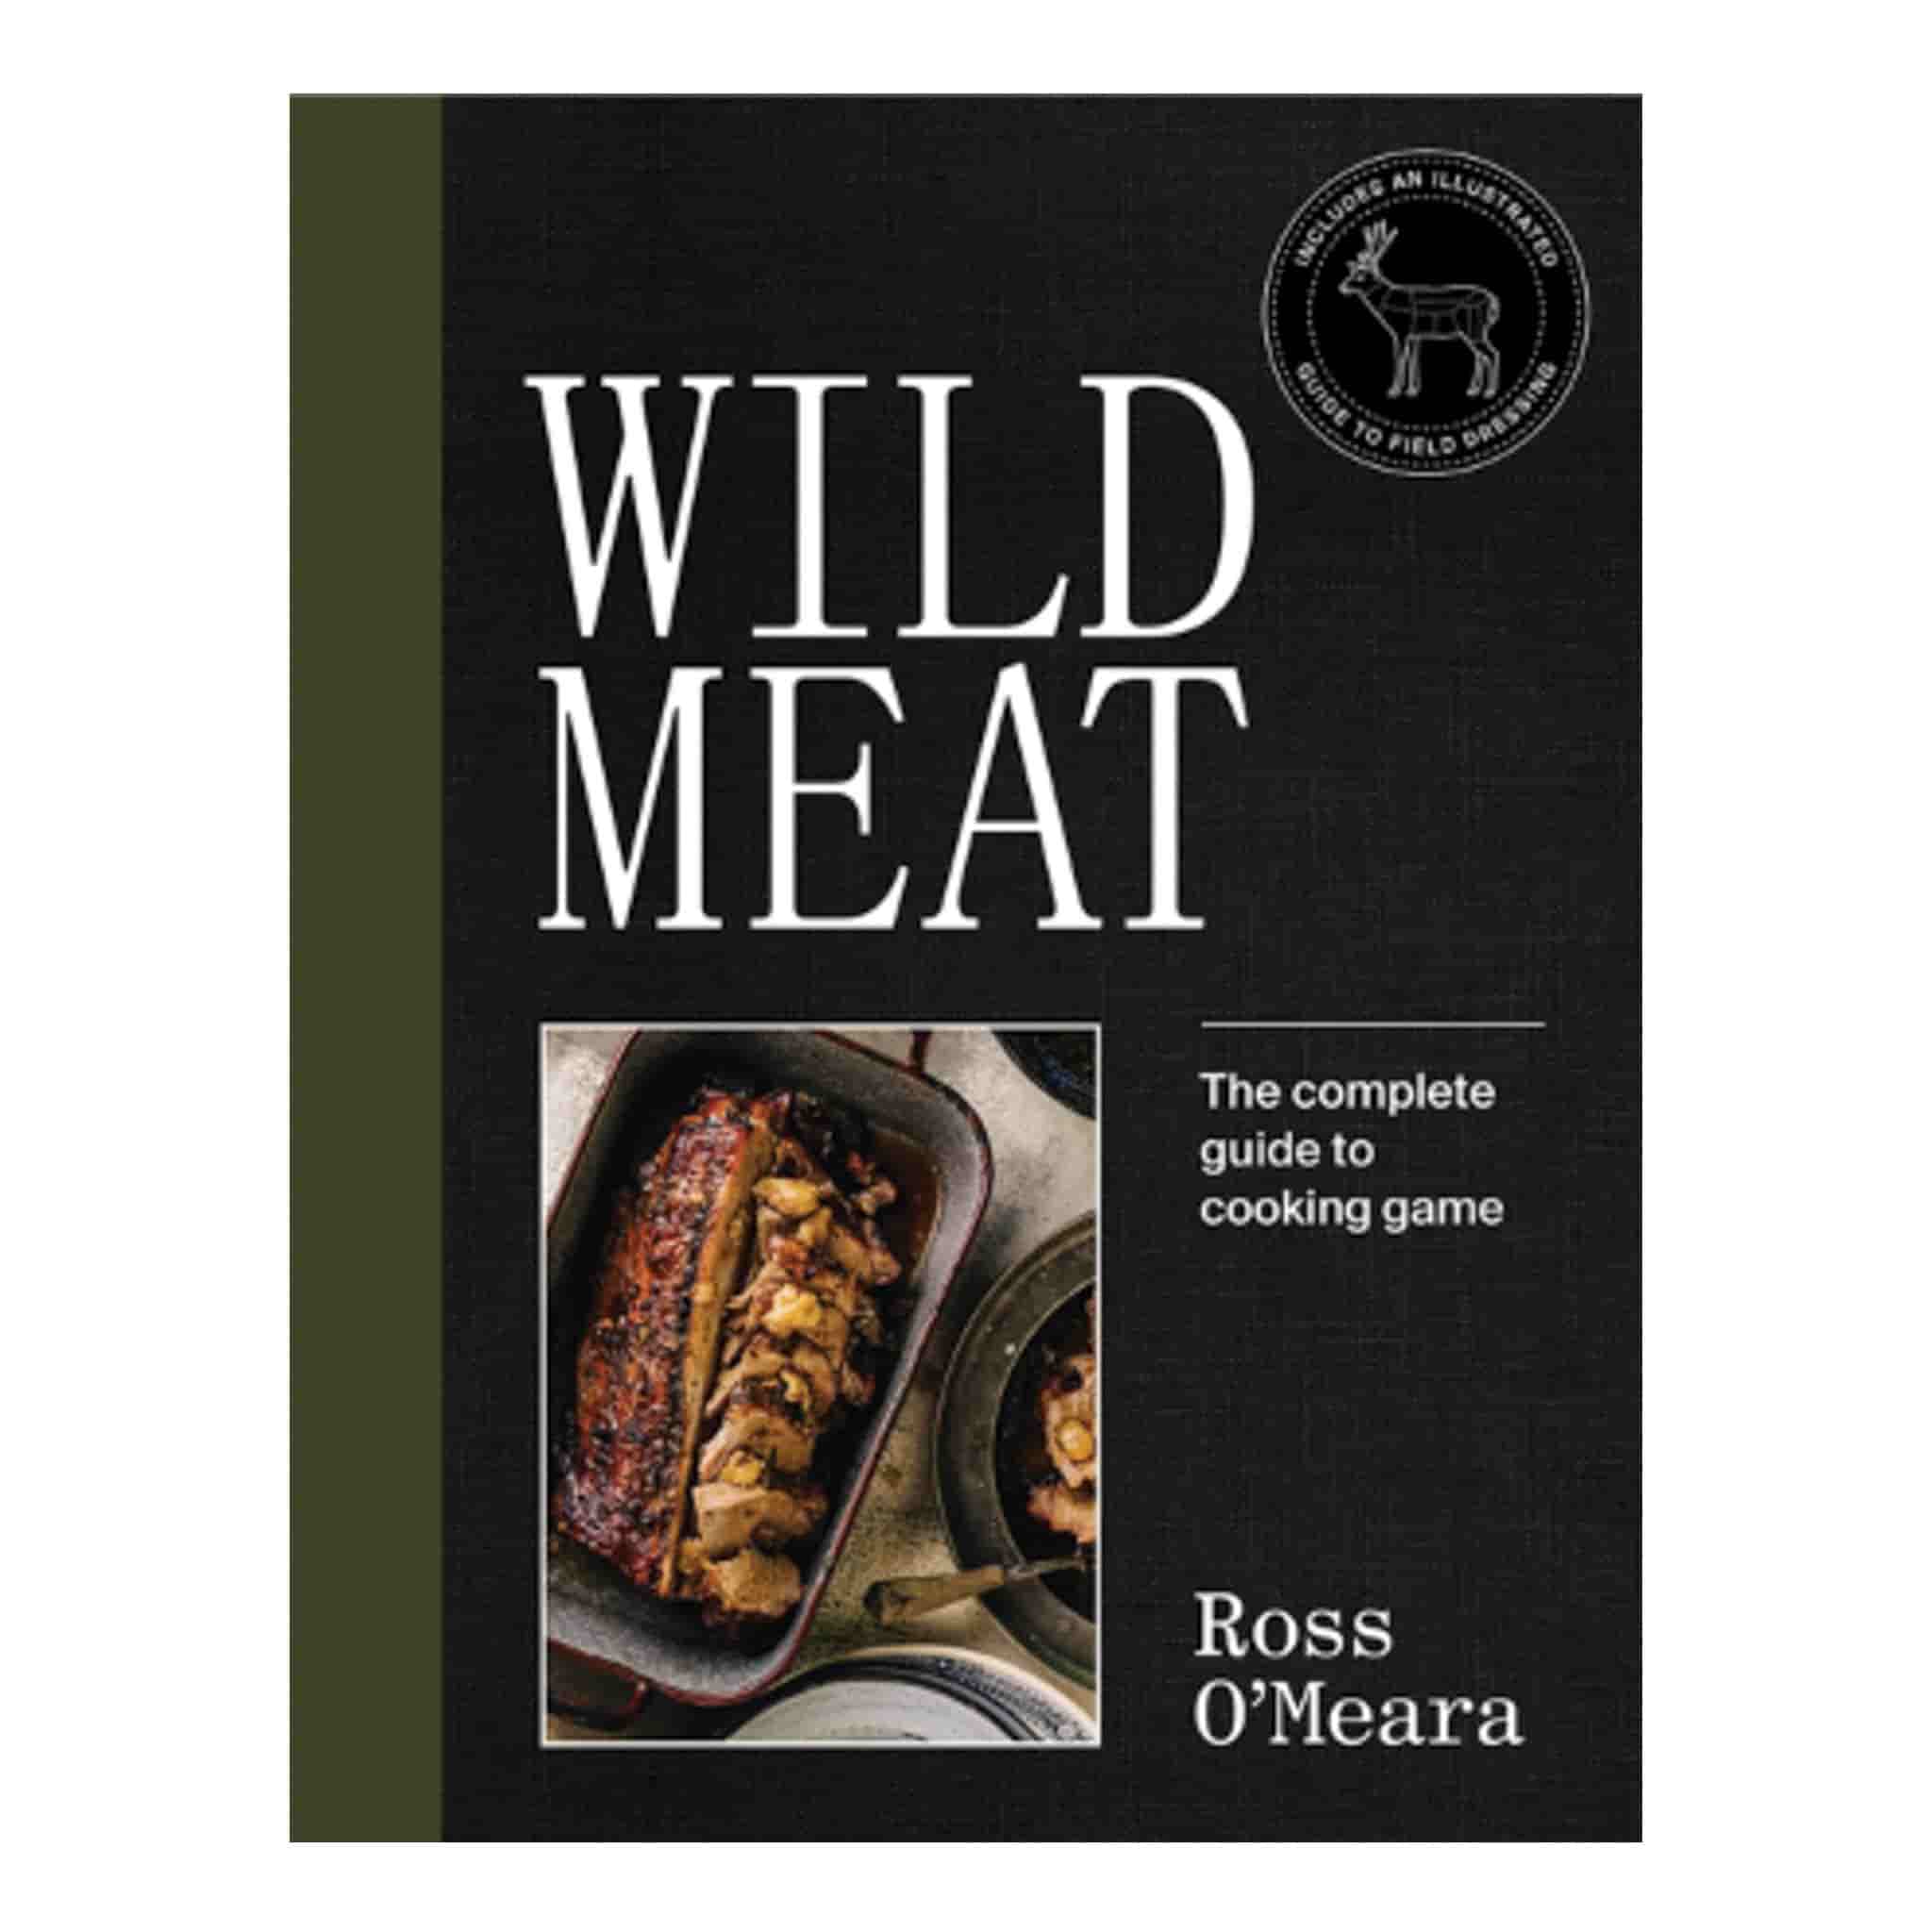 Wild Meat, by Ross O'Meara